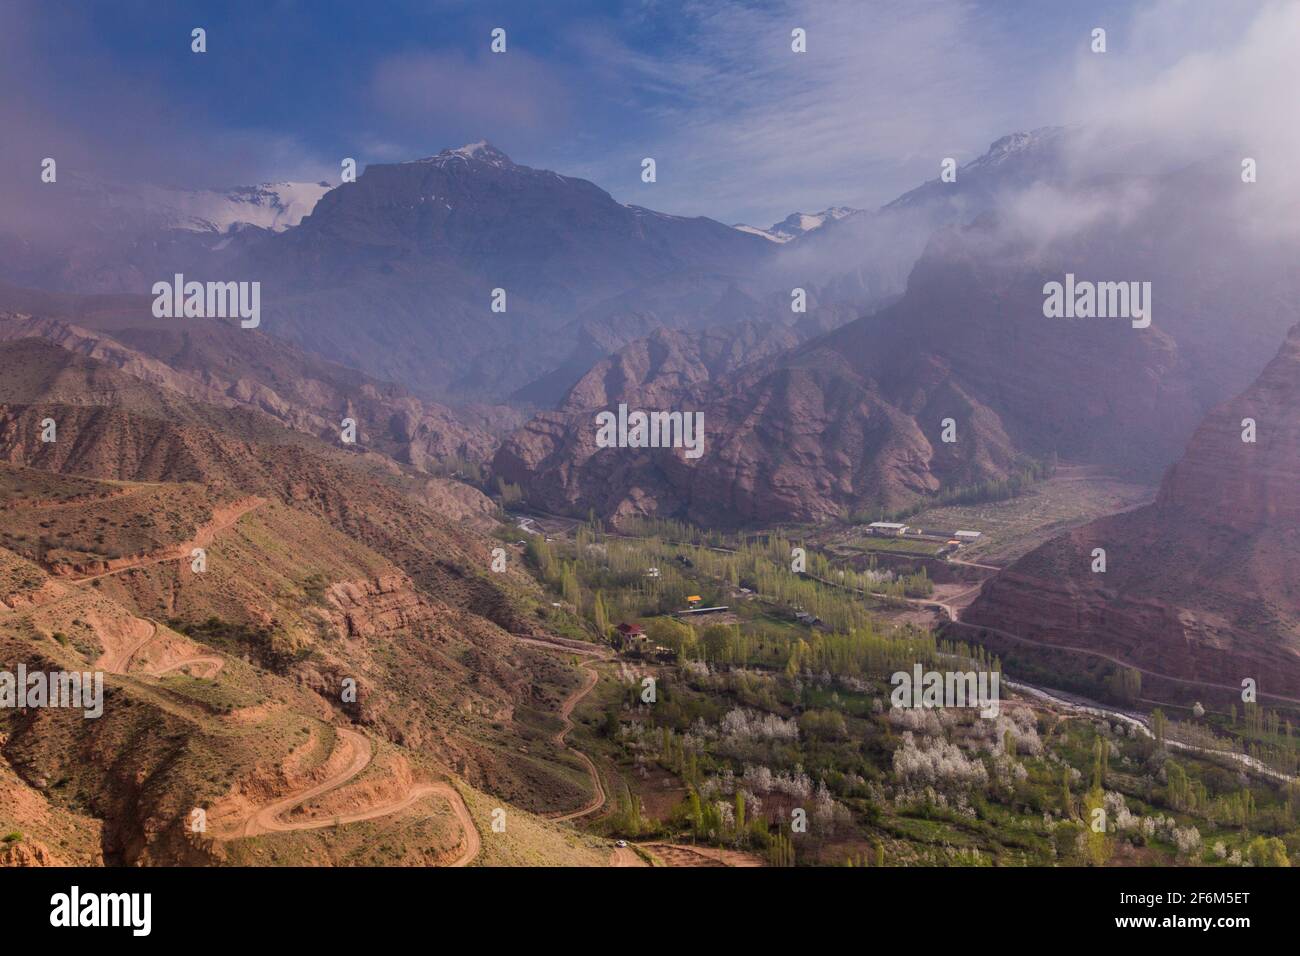 Misty view of Alamut valley in Iran Stock Photo